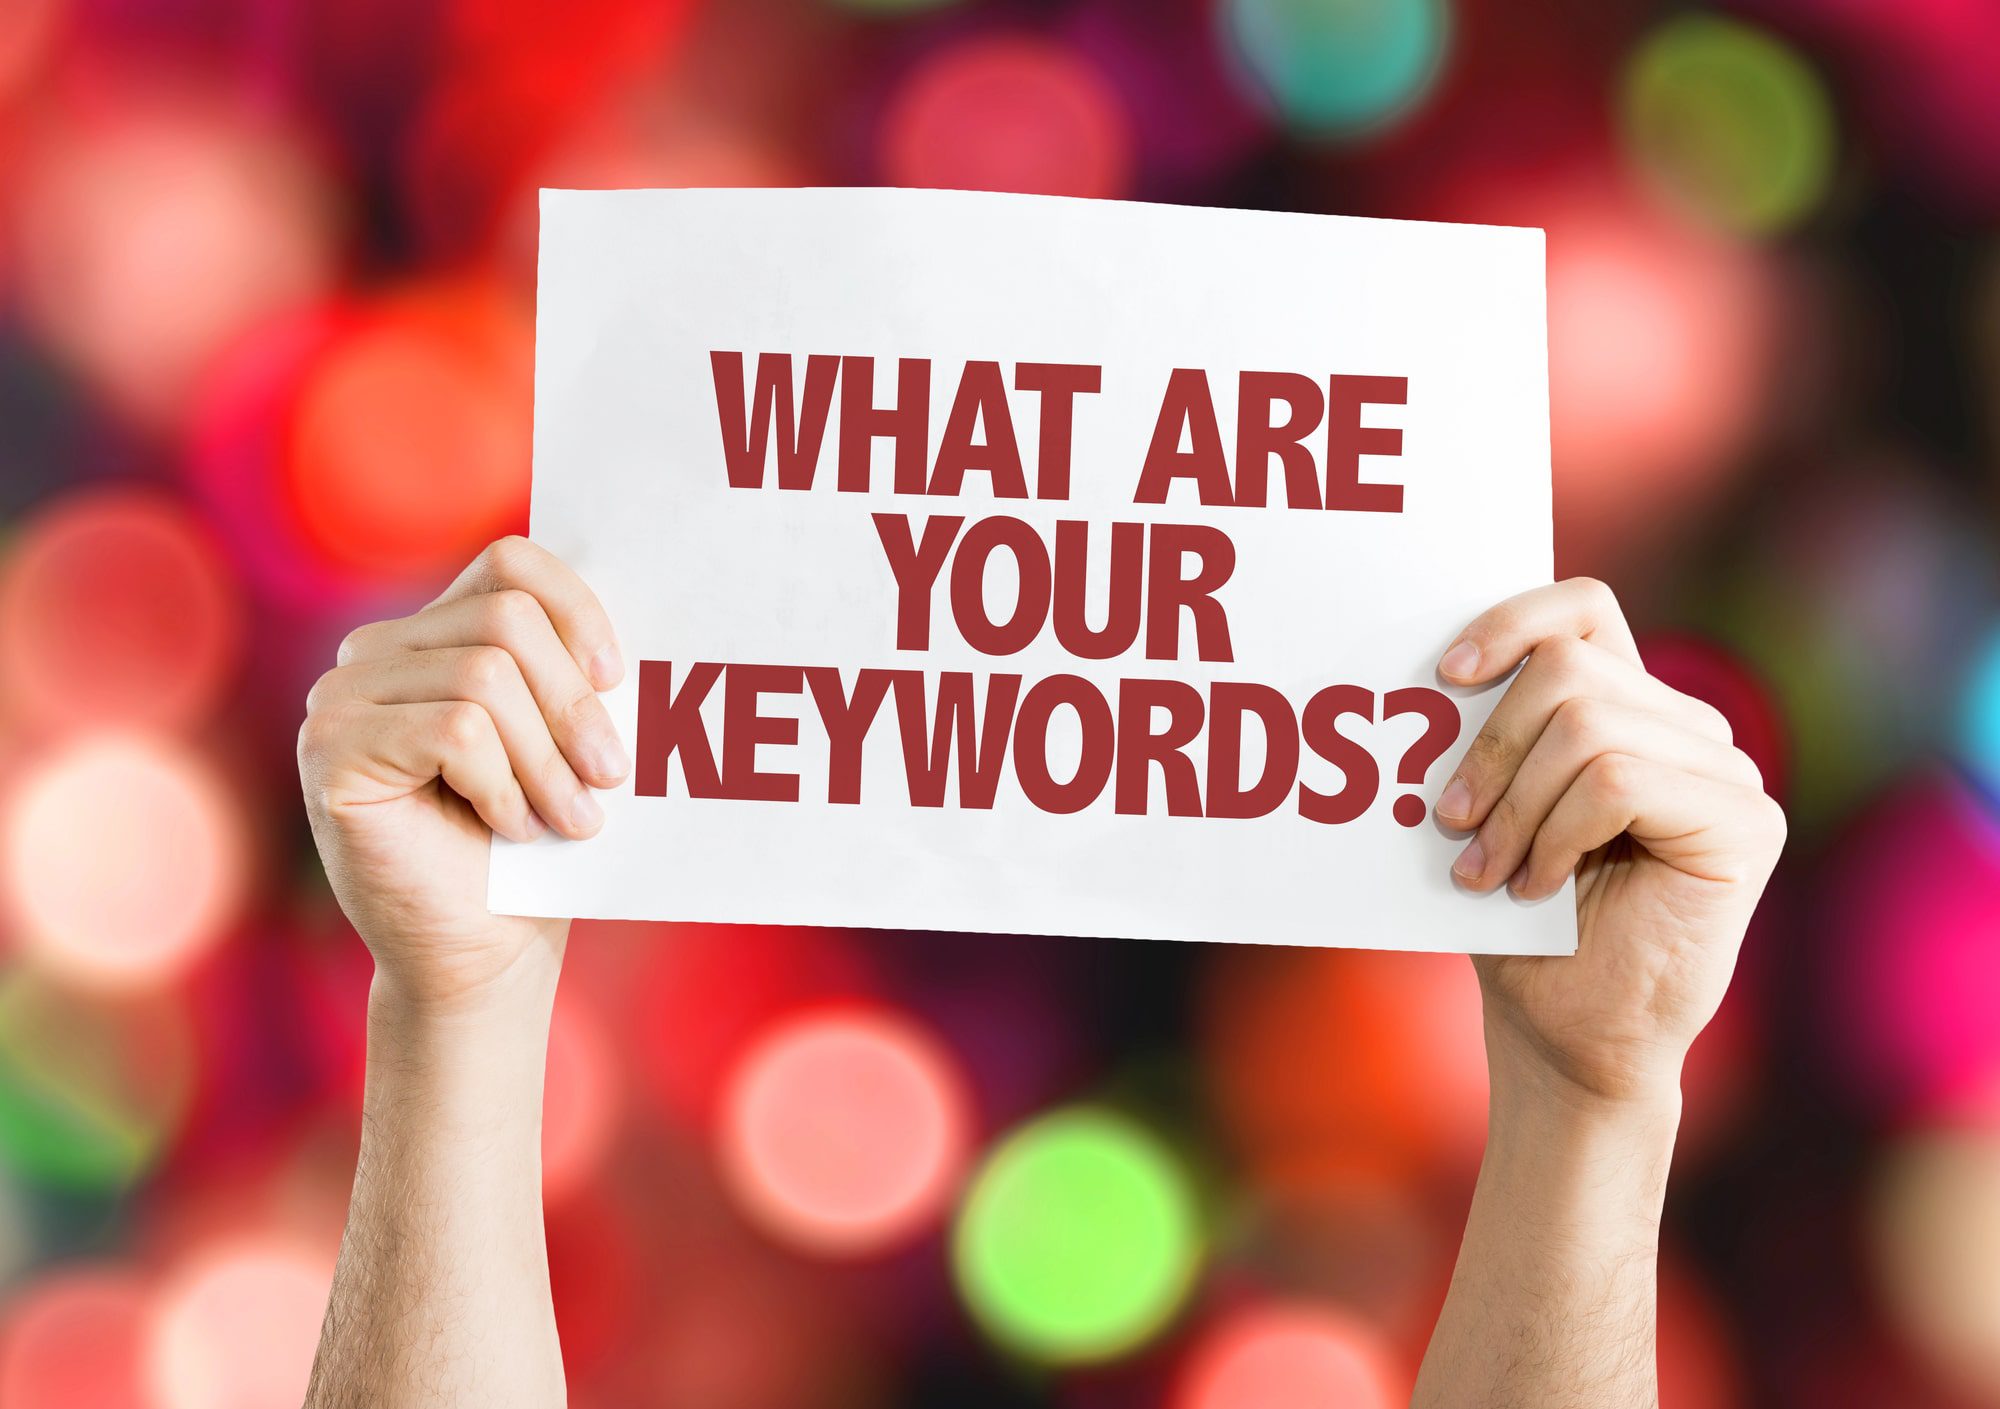 person holding a paper sign that reads "WHAT ARE YOUR KEYWORDS?"